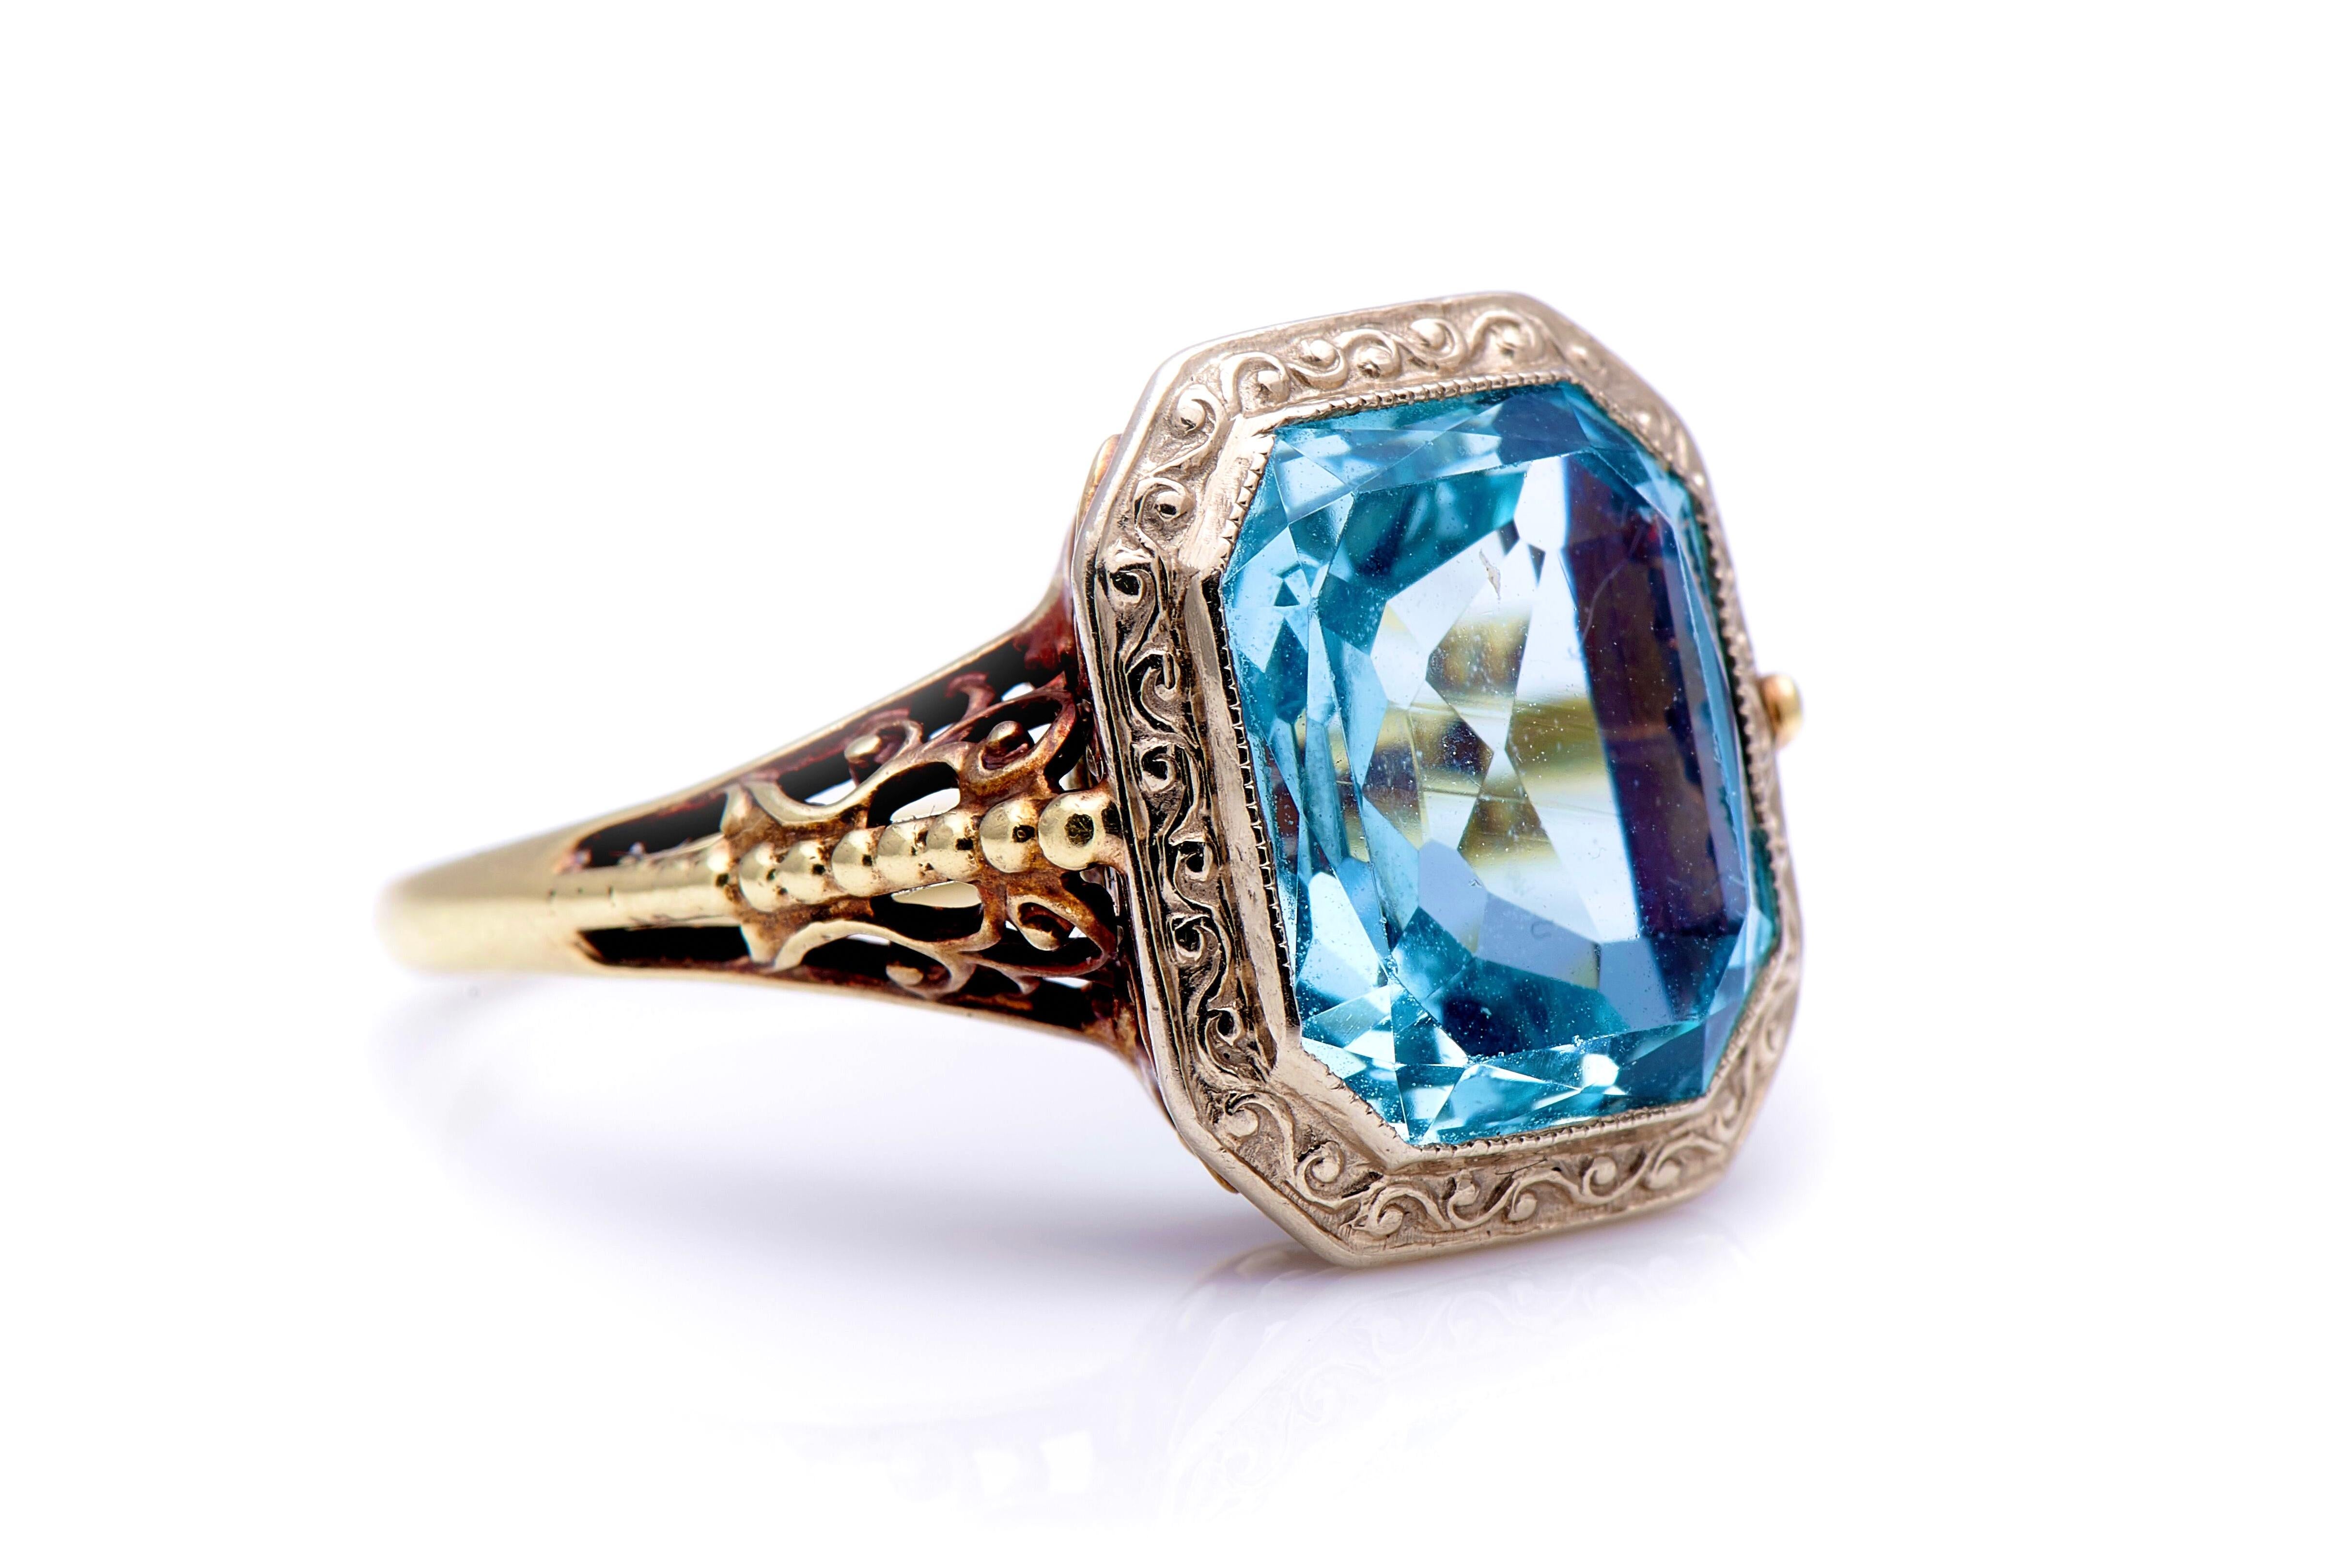 Aquamarine ring, early 20th century. The simple, geometric cut of this aquamarine is juxtaposed with an elaborate decorated mount, with millegrained borders, chased scrollwork around the setting and an intricately pierced gallery. The pale blue form